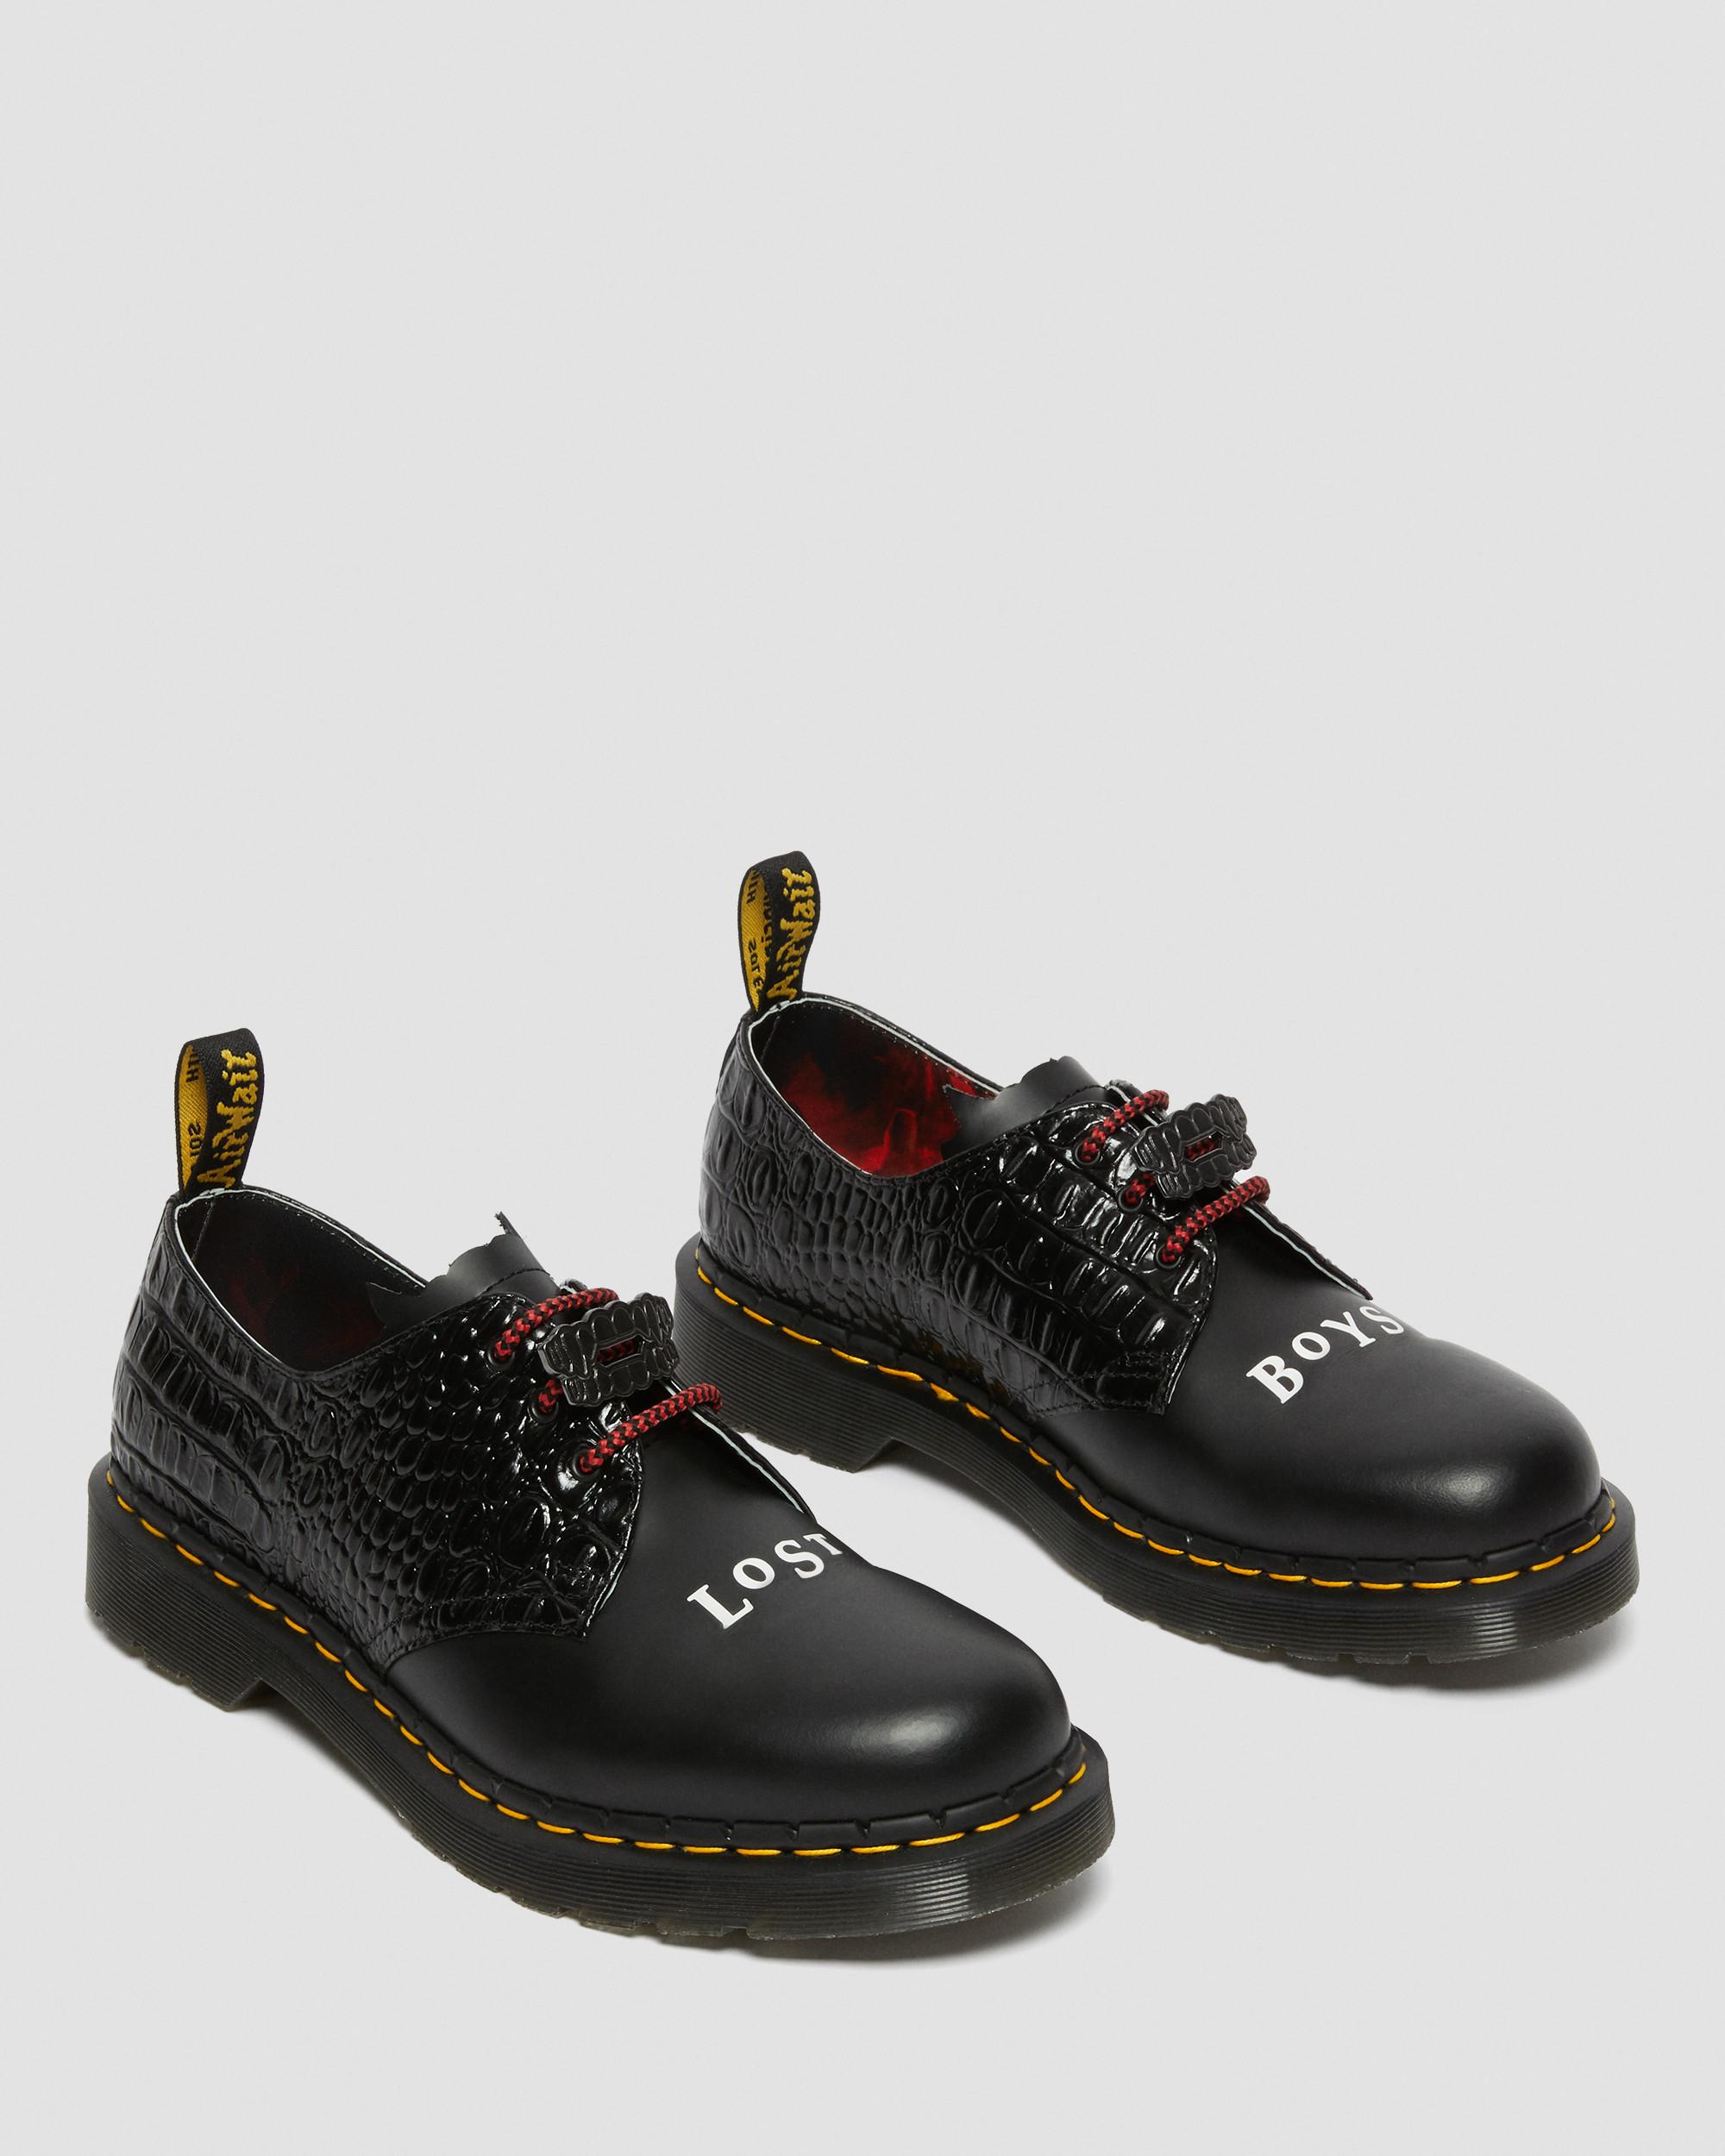 1461 WB LOST BOYS LEATHER SHOES1461 WB LOST BOYS LEATHER SHOES Dr. Martens